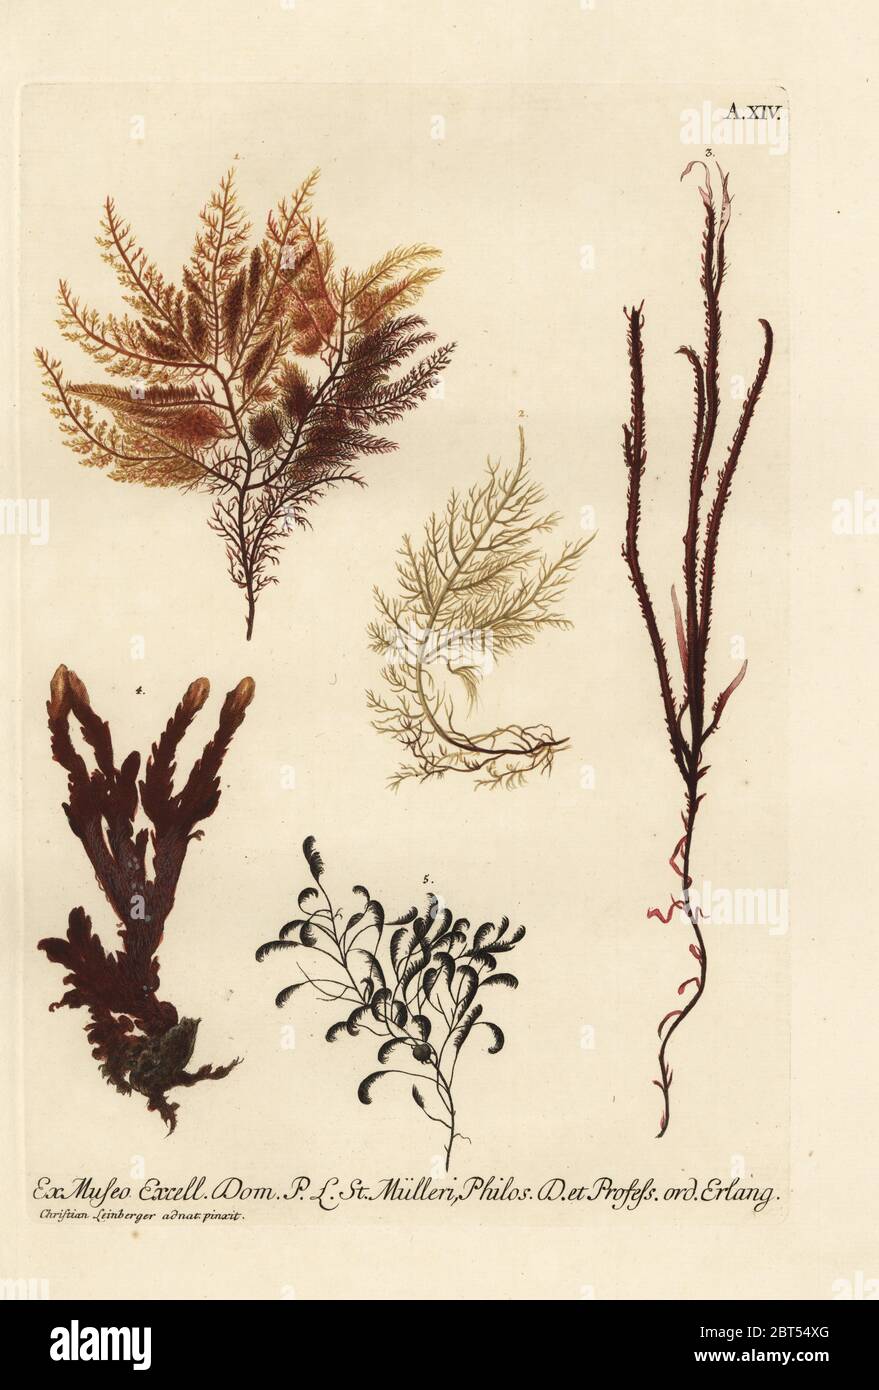 Fine coral from the Cape of Good Hope 1, sea fan, Keratophyton album 2, sea moss, Fucus longifoliis simbriatus 3, sea moss, Lichenastrum 4, and sea fir, Sertularia pennata 5. Handcoloured copperplate engraving after an illustration by Christian Leinberger from Georg Wolfgang Knorr's Deliciae Naturae Selectae of Kabinet van Zeldzaamheden der Natuur, Blusse and Son, Nuremberg, 1771. Specimens from a Wunderkammer or Cabinet of Curiosities of P.L. Muller. Stock Photo